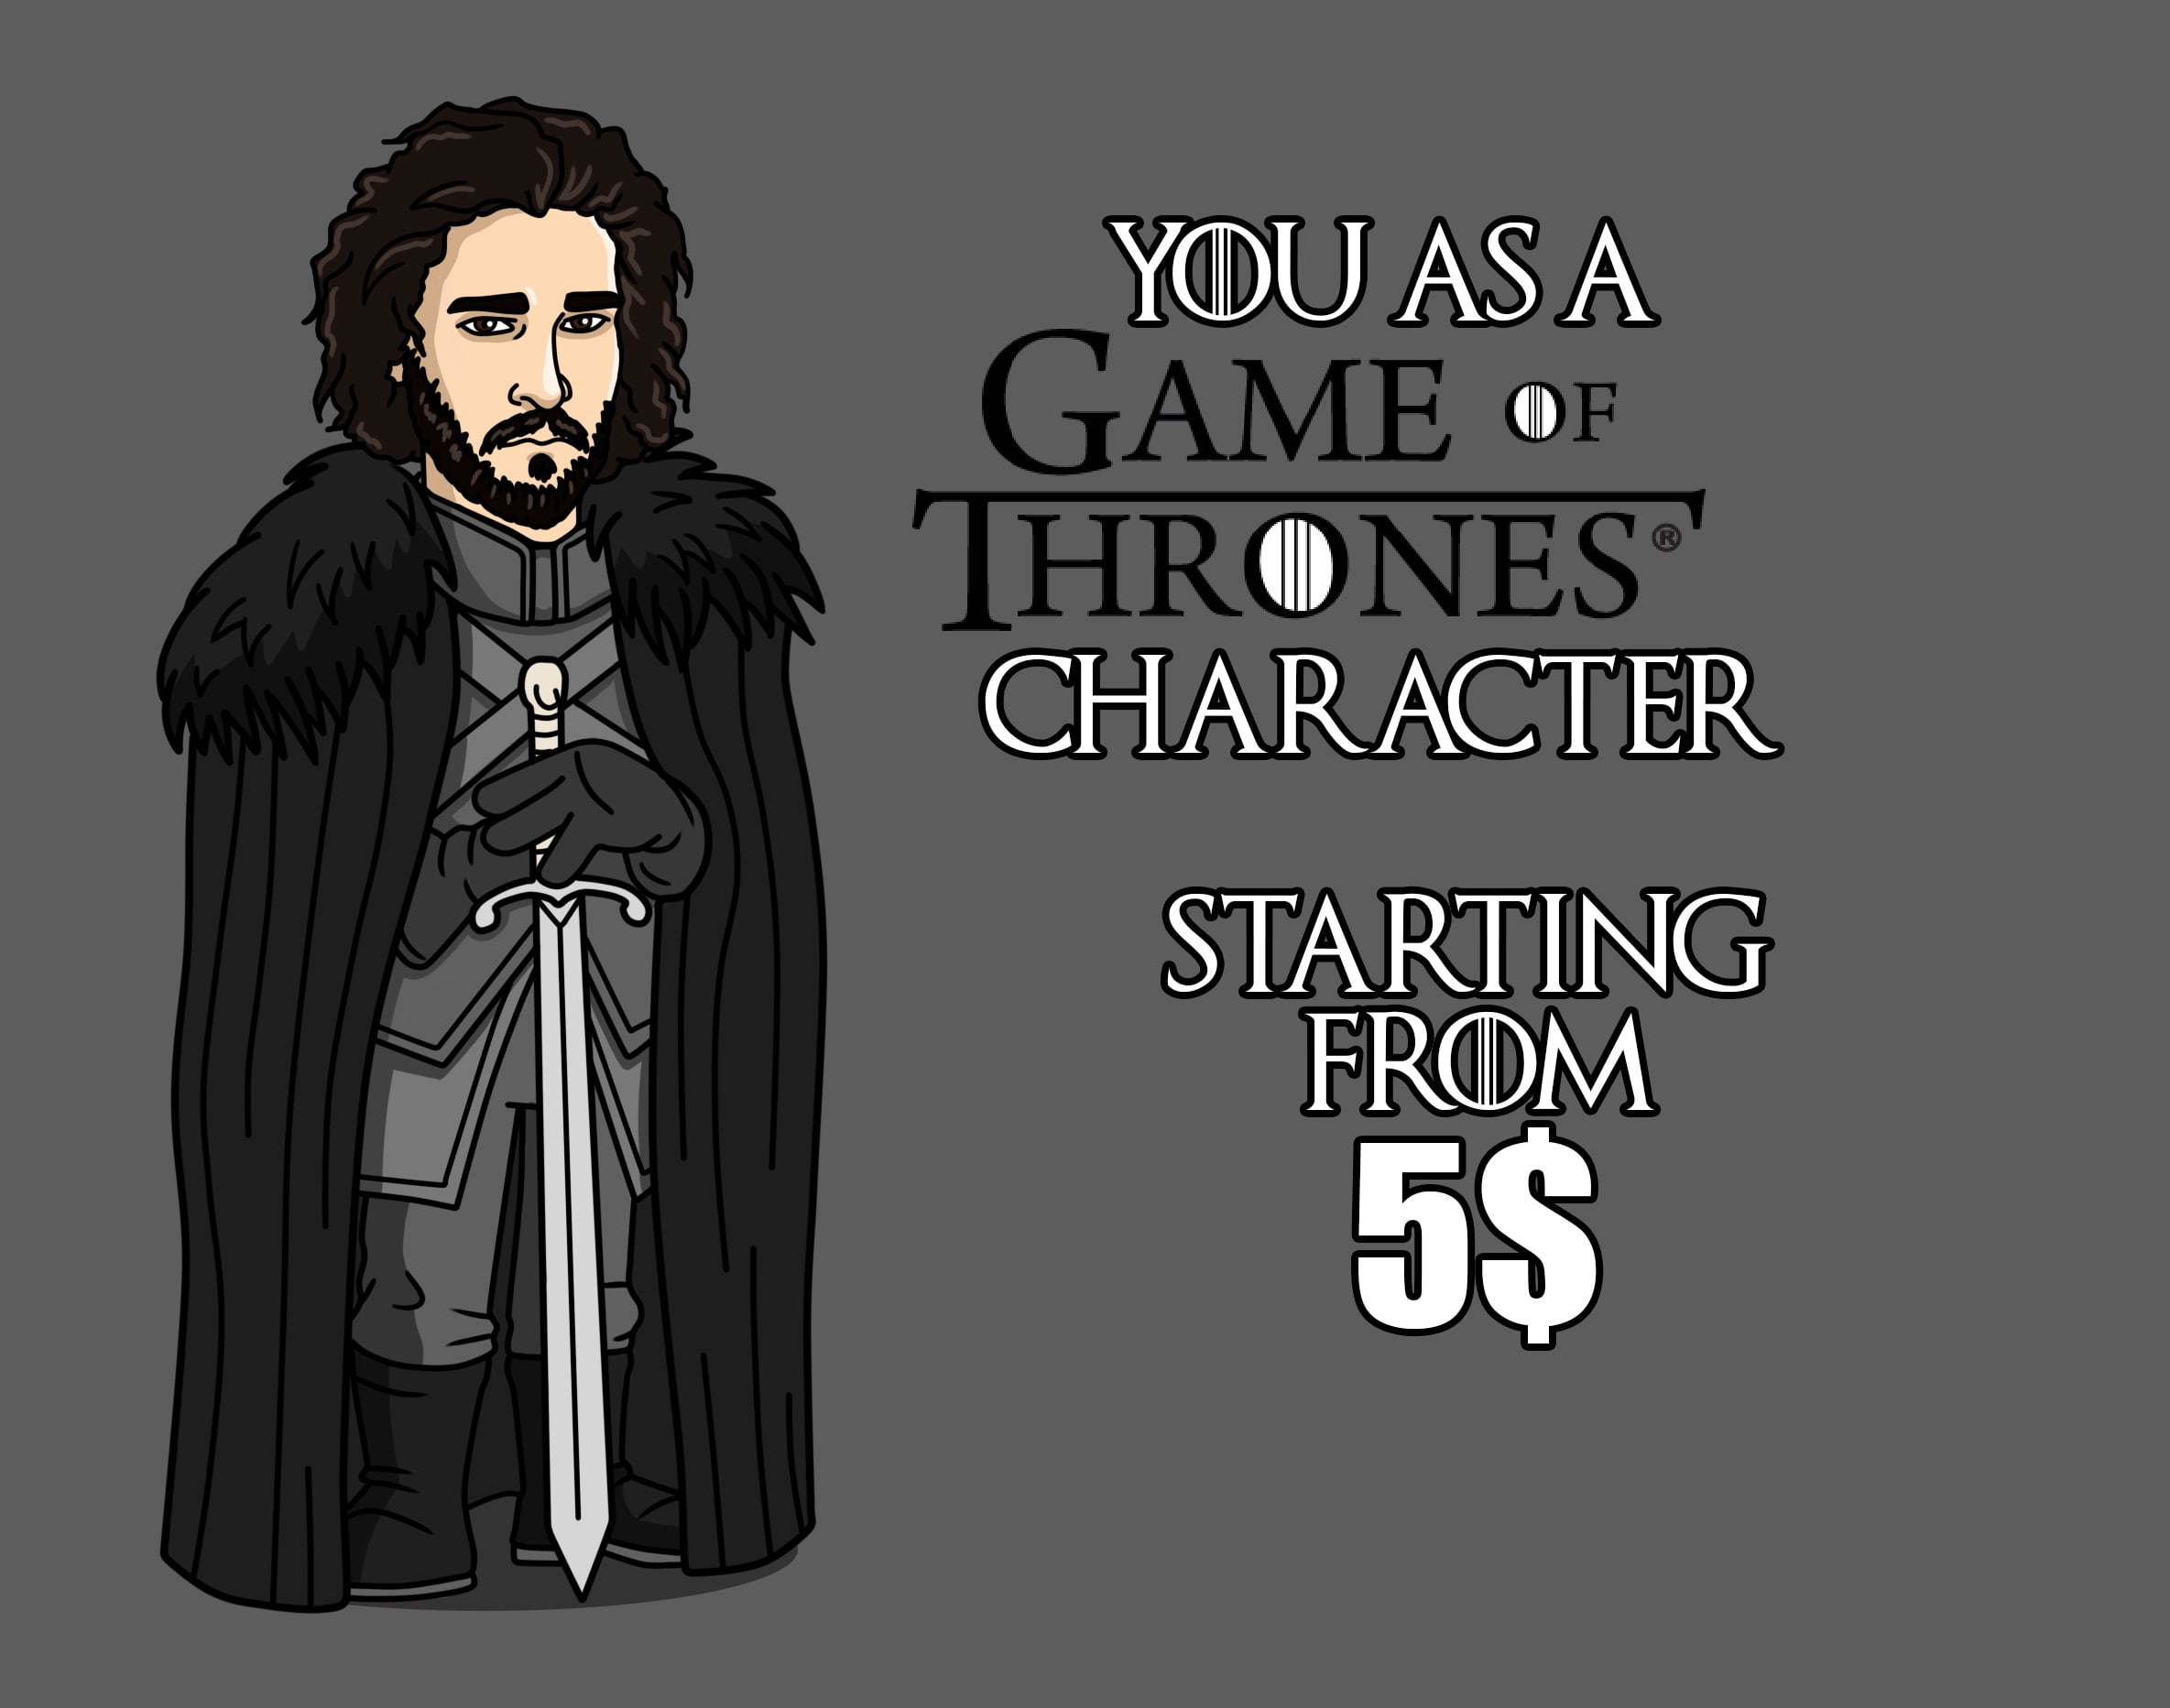 Draw you as a game of thrones character by Aldaineredan | Fiverr